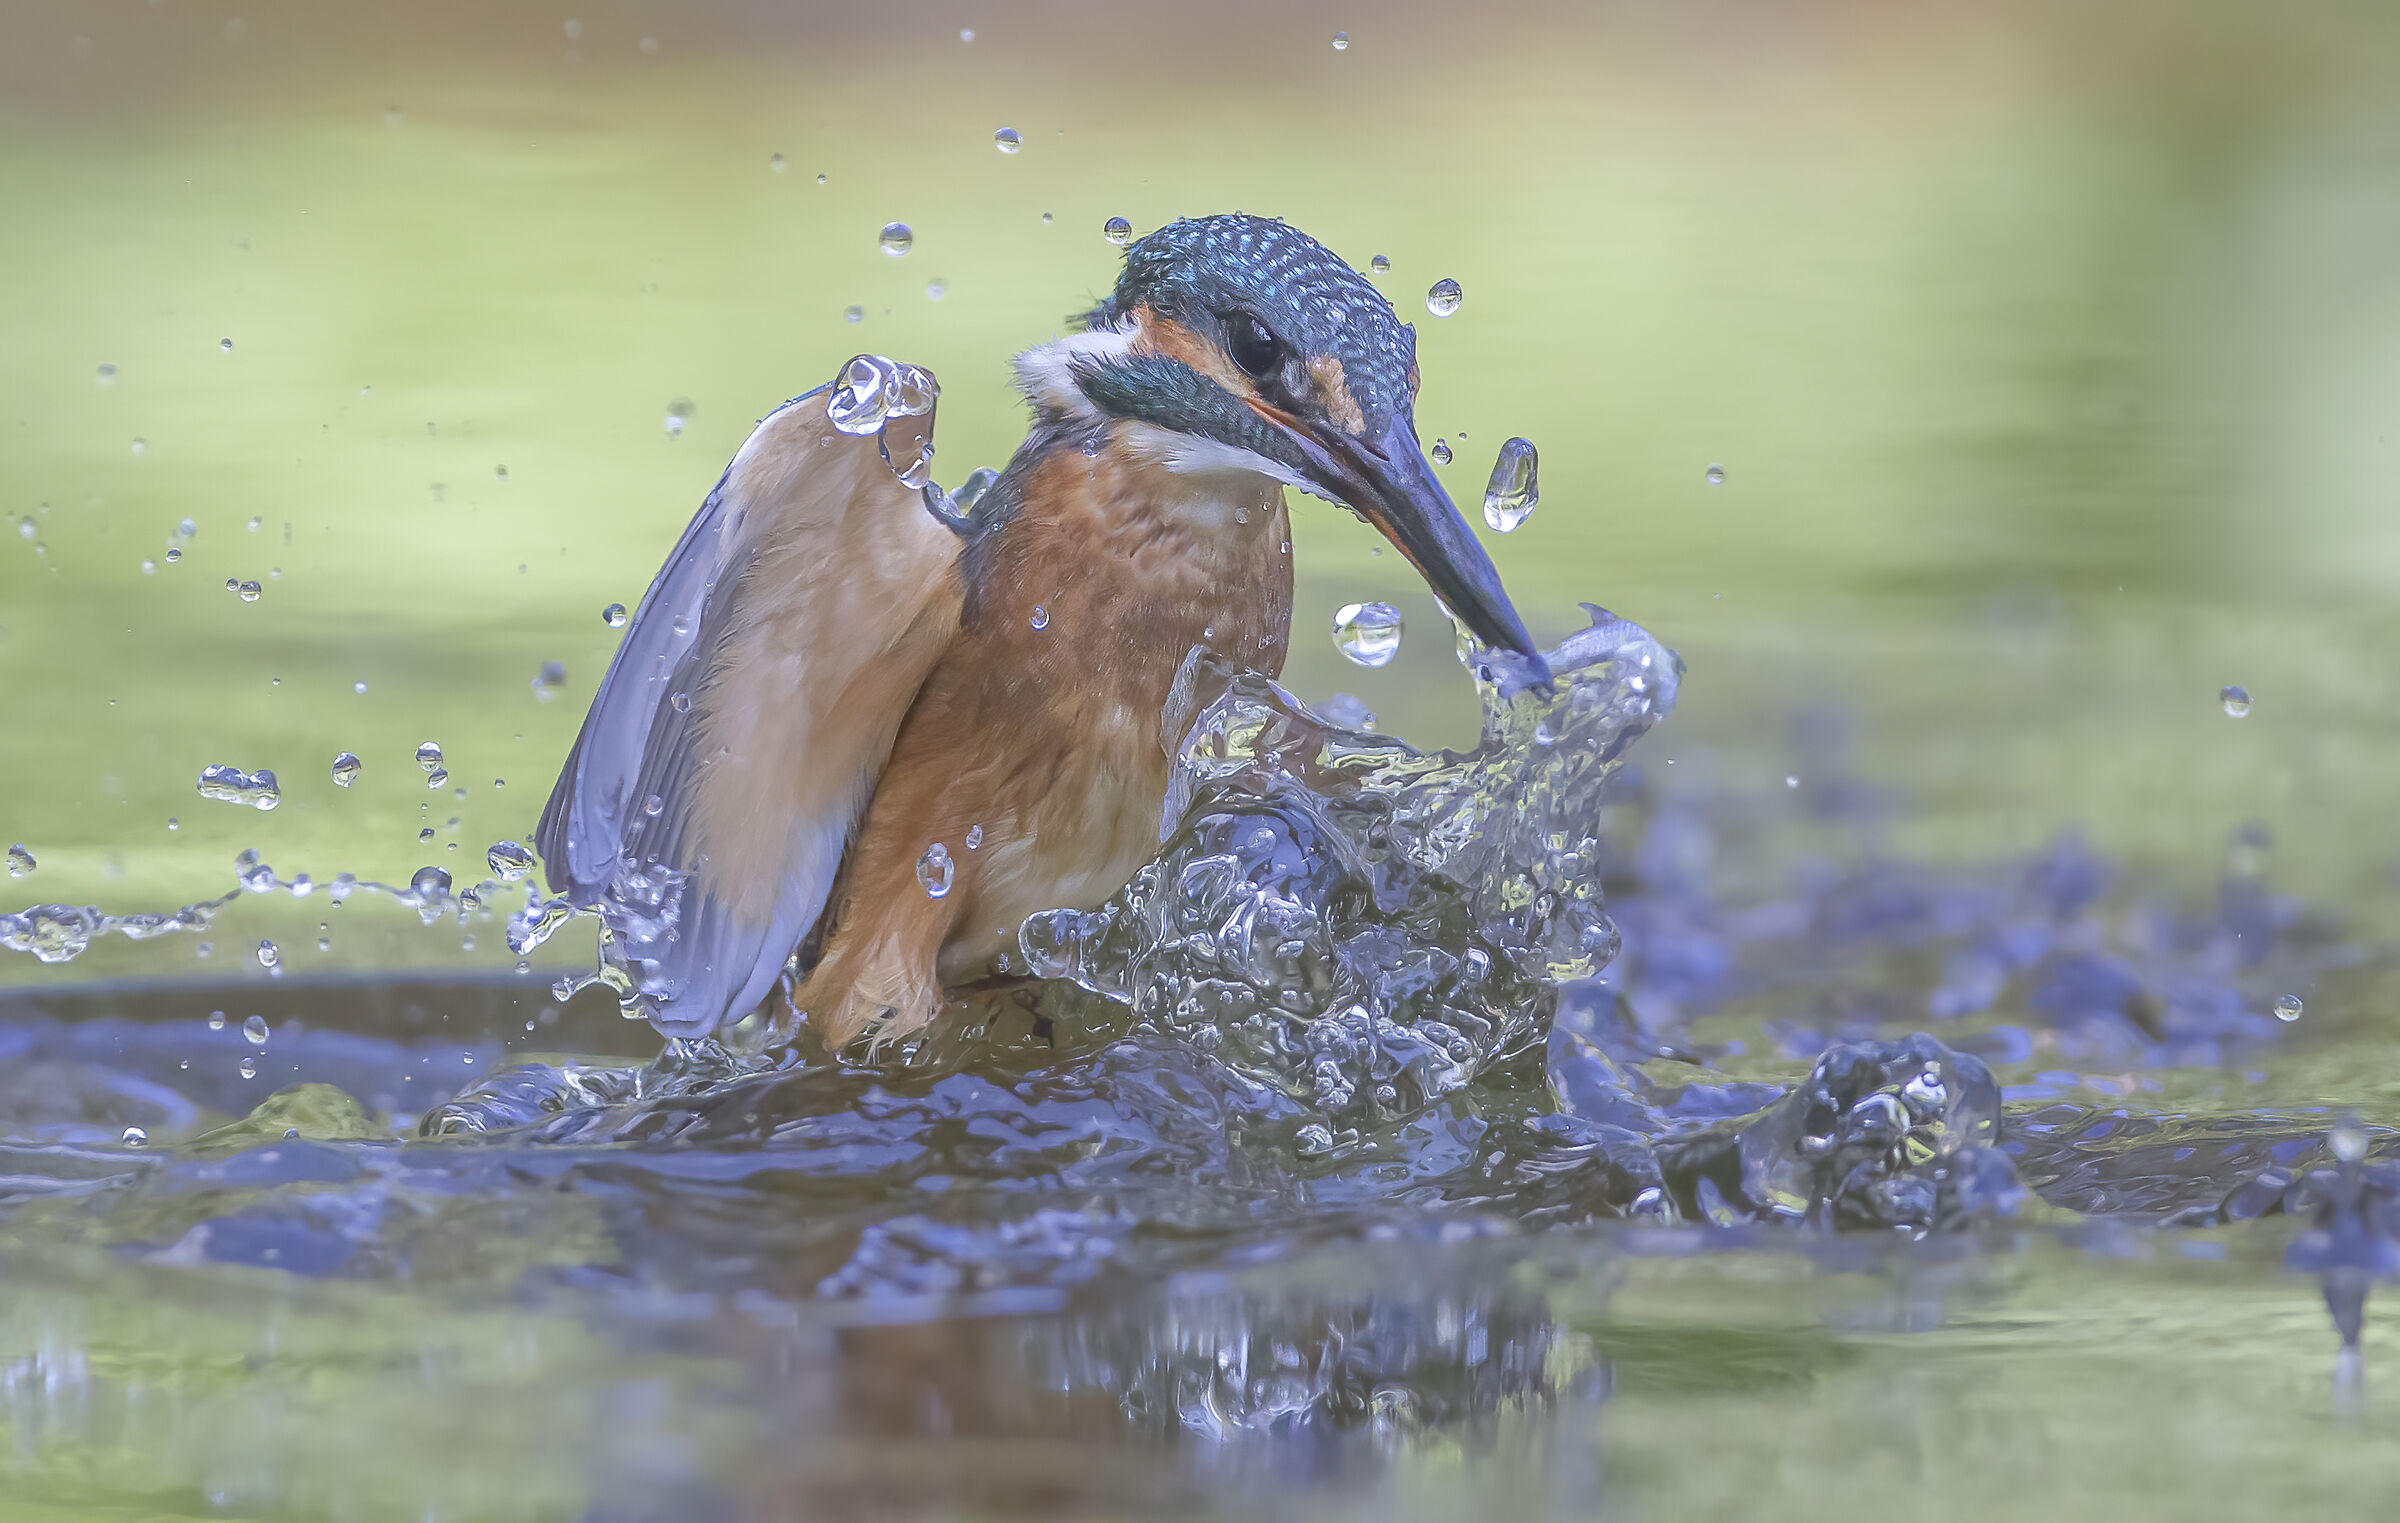 The ascent of the kingfisher...